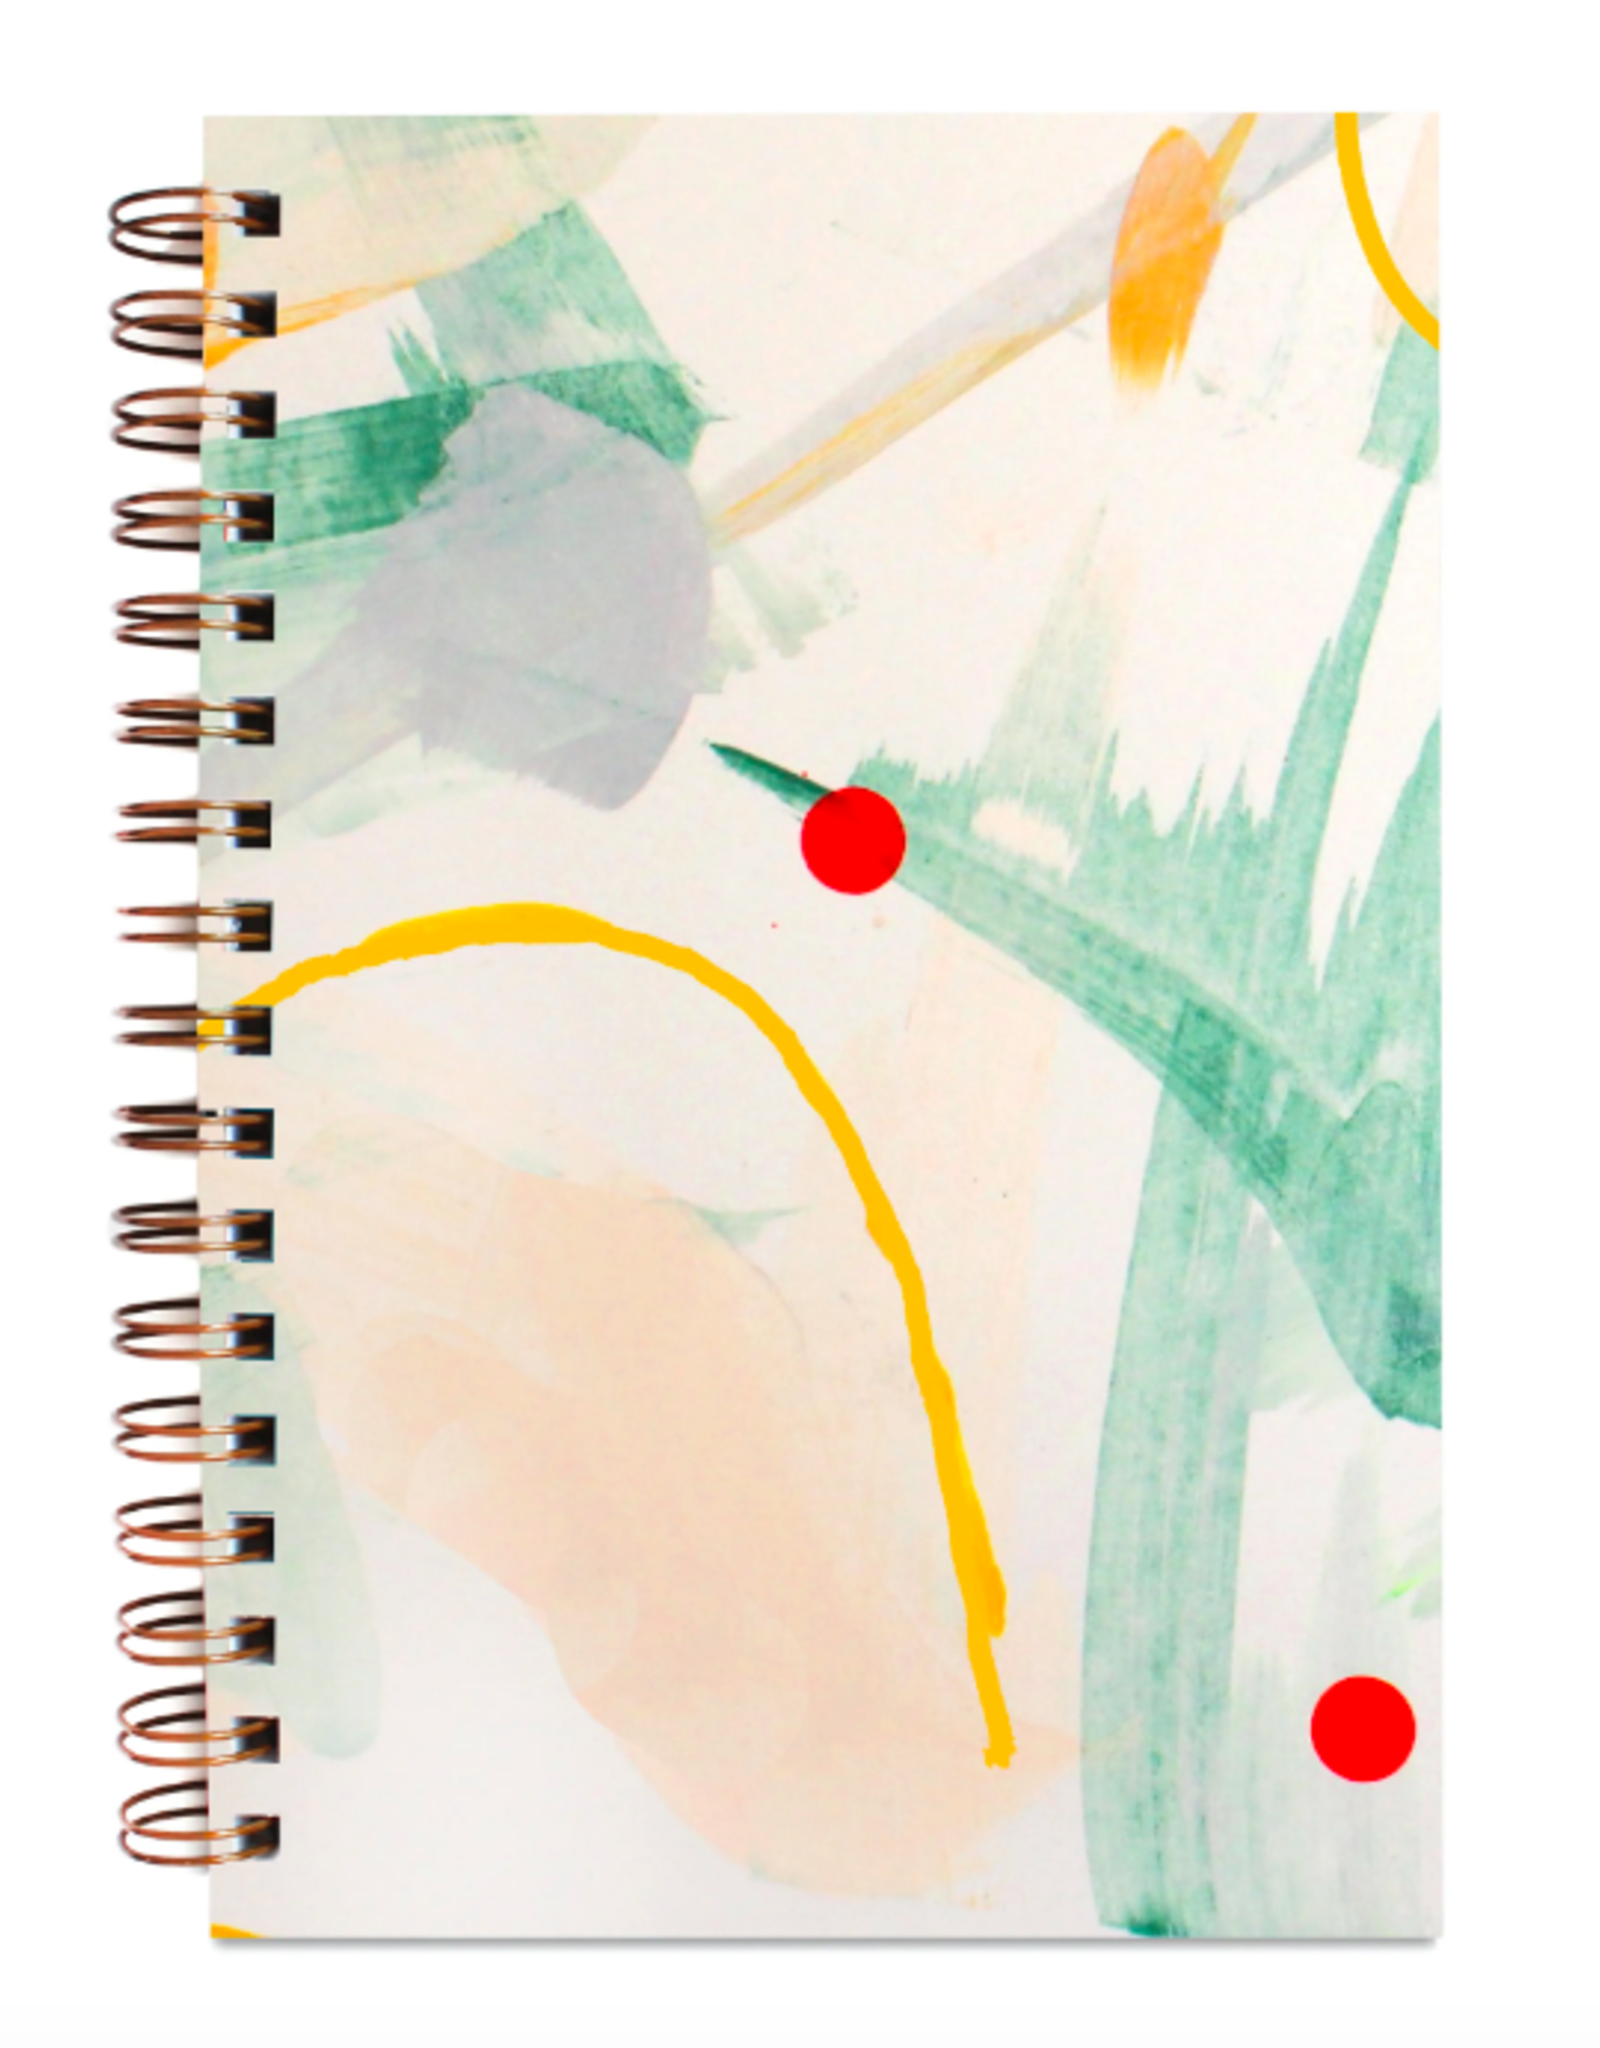 Dewdrop Painted Notebook